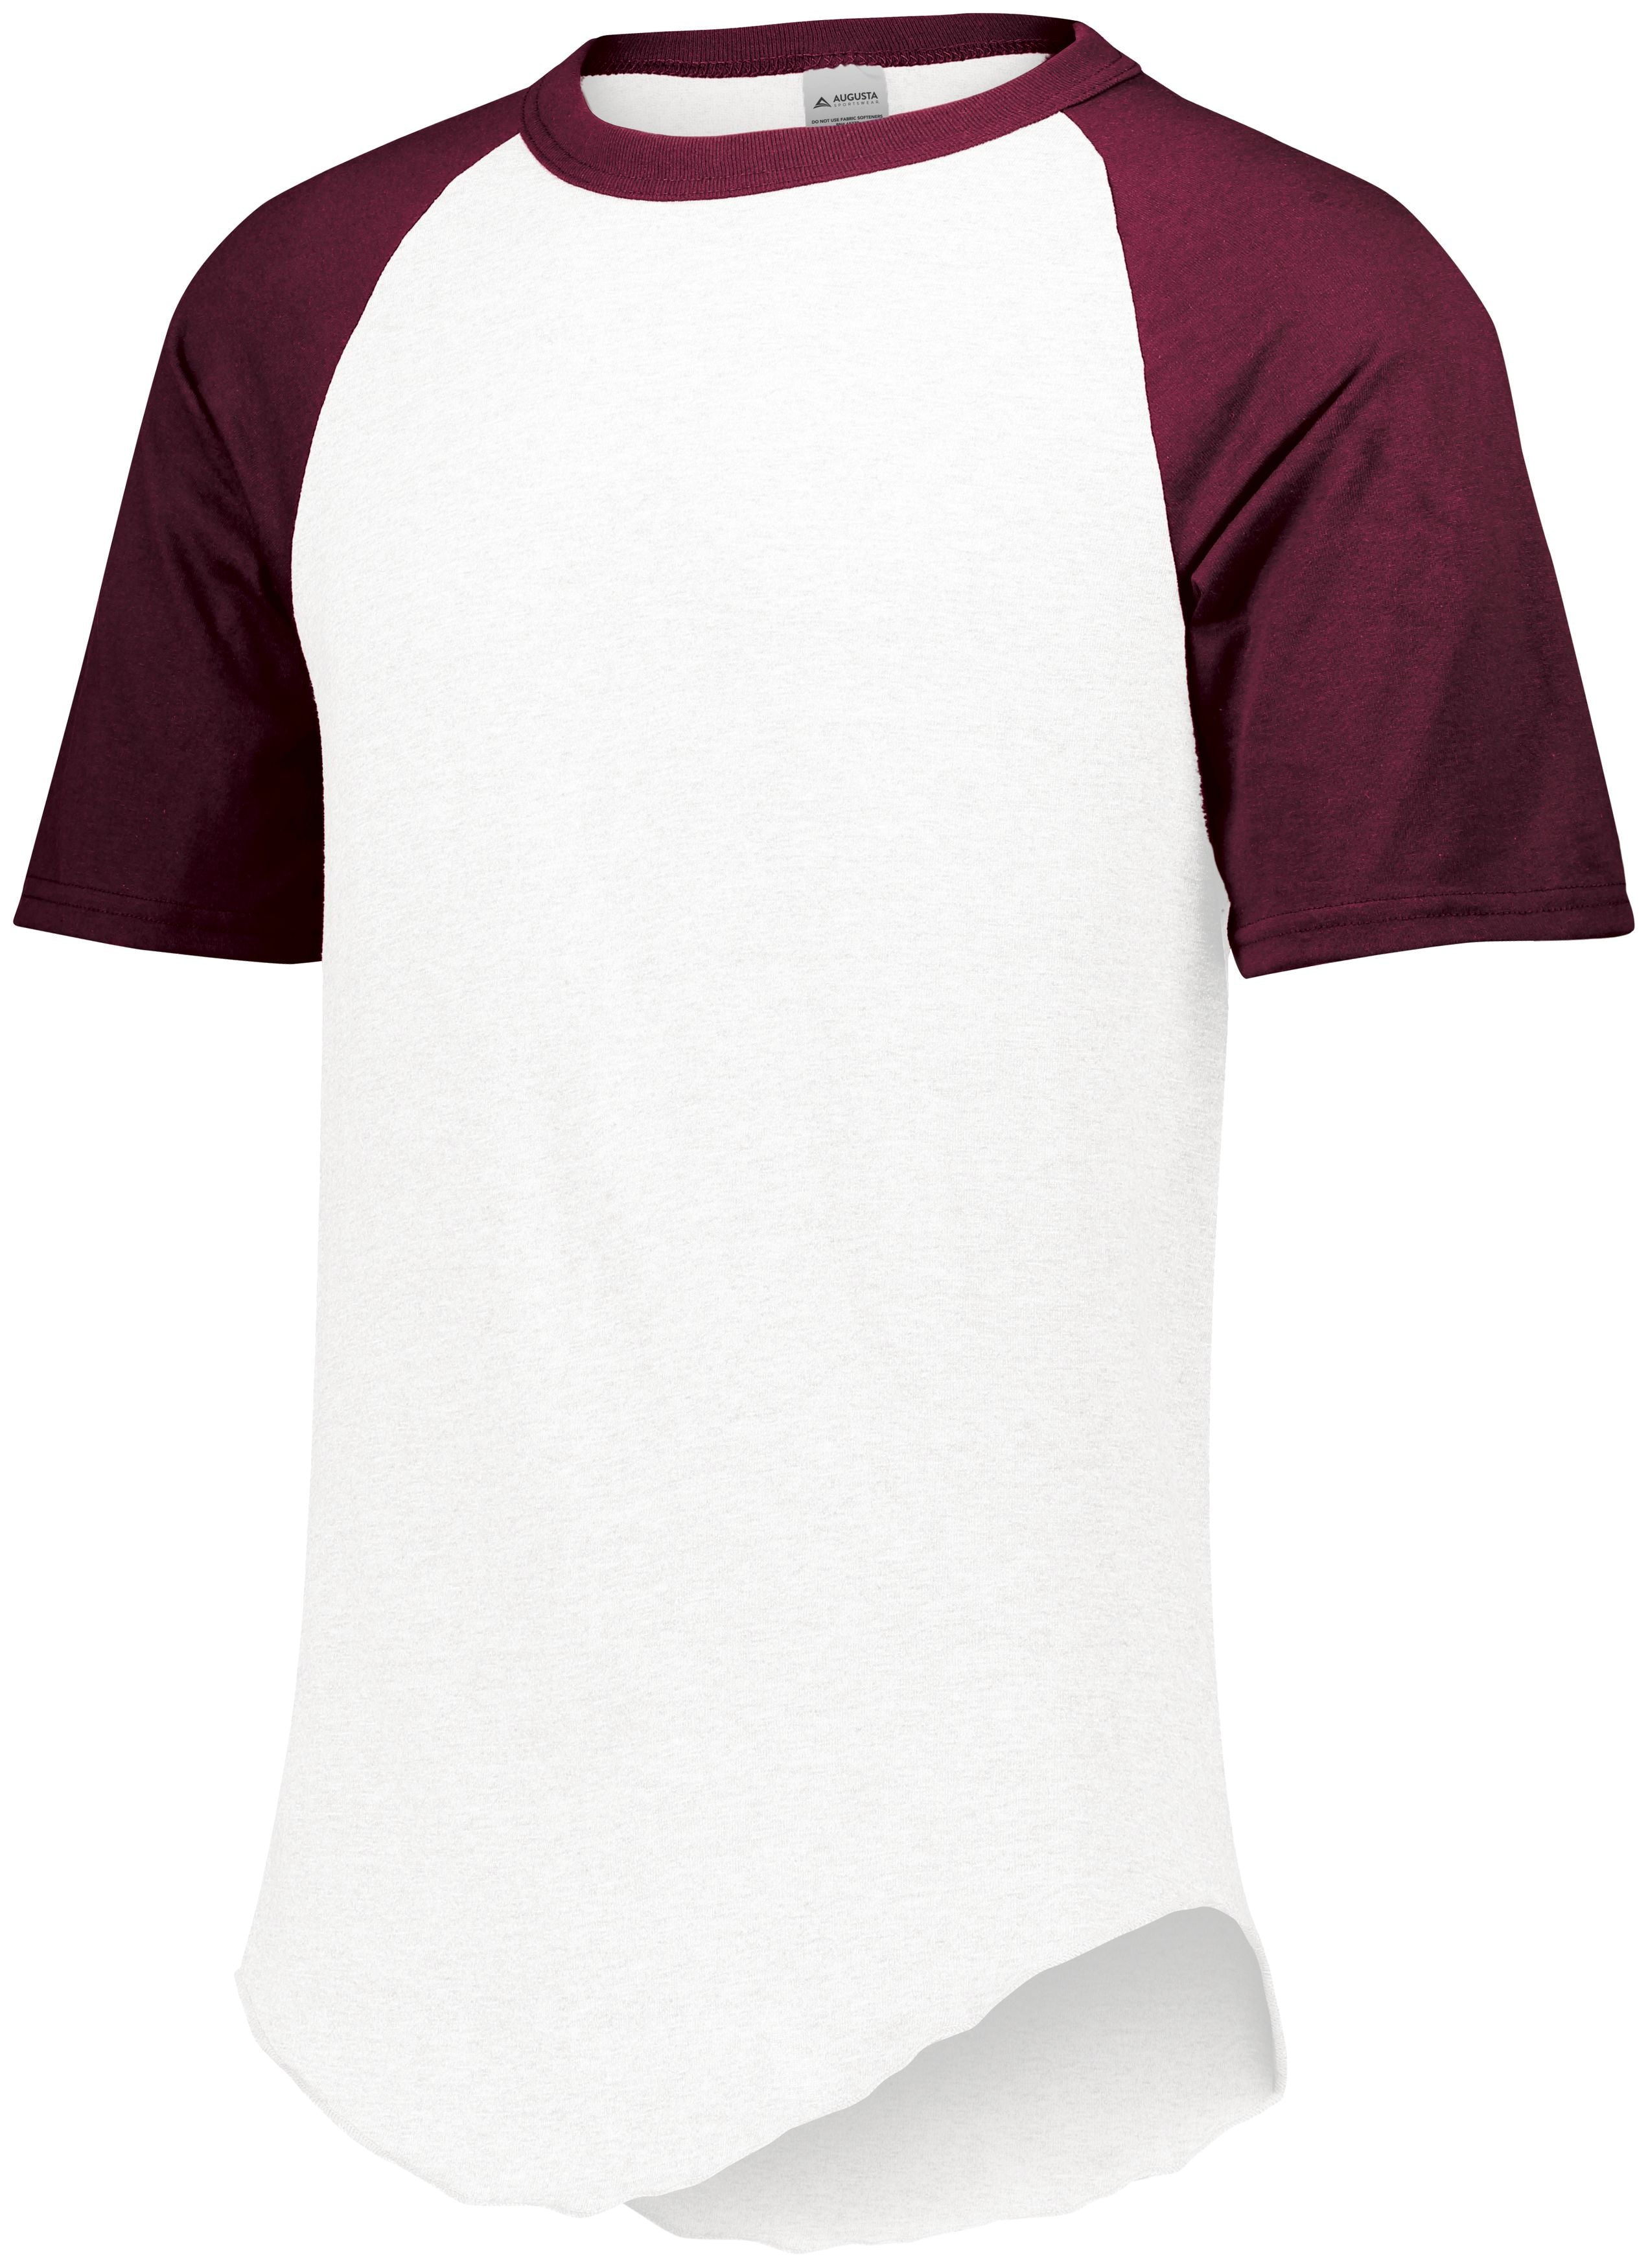 Augusta Sportswear Short Sleeve Baseball Jersey in White/Maroon  -Part of the Adult, Adult-Jersey, Augusta-Products, Baseball, Shirts, All-Sports, All-Sports-1 product lines at KanaleyCreations.com